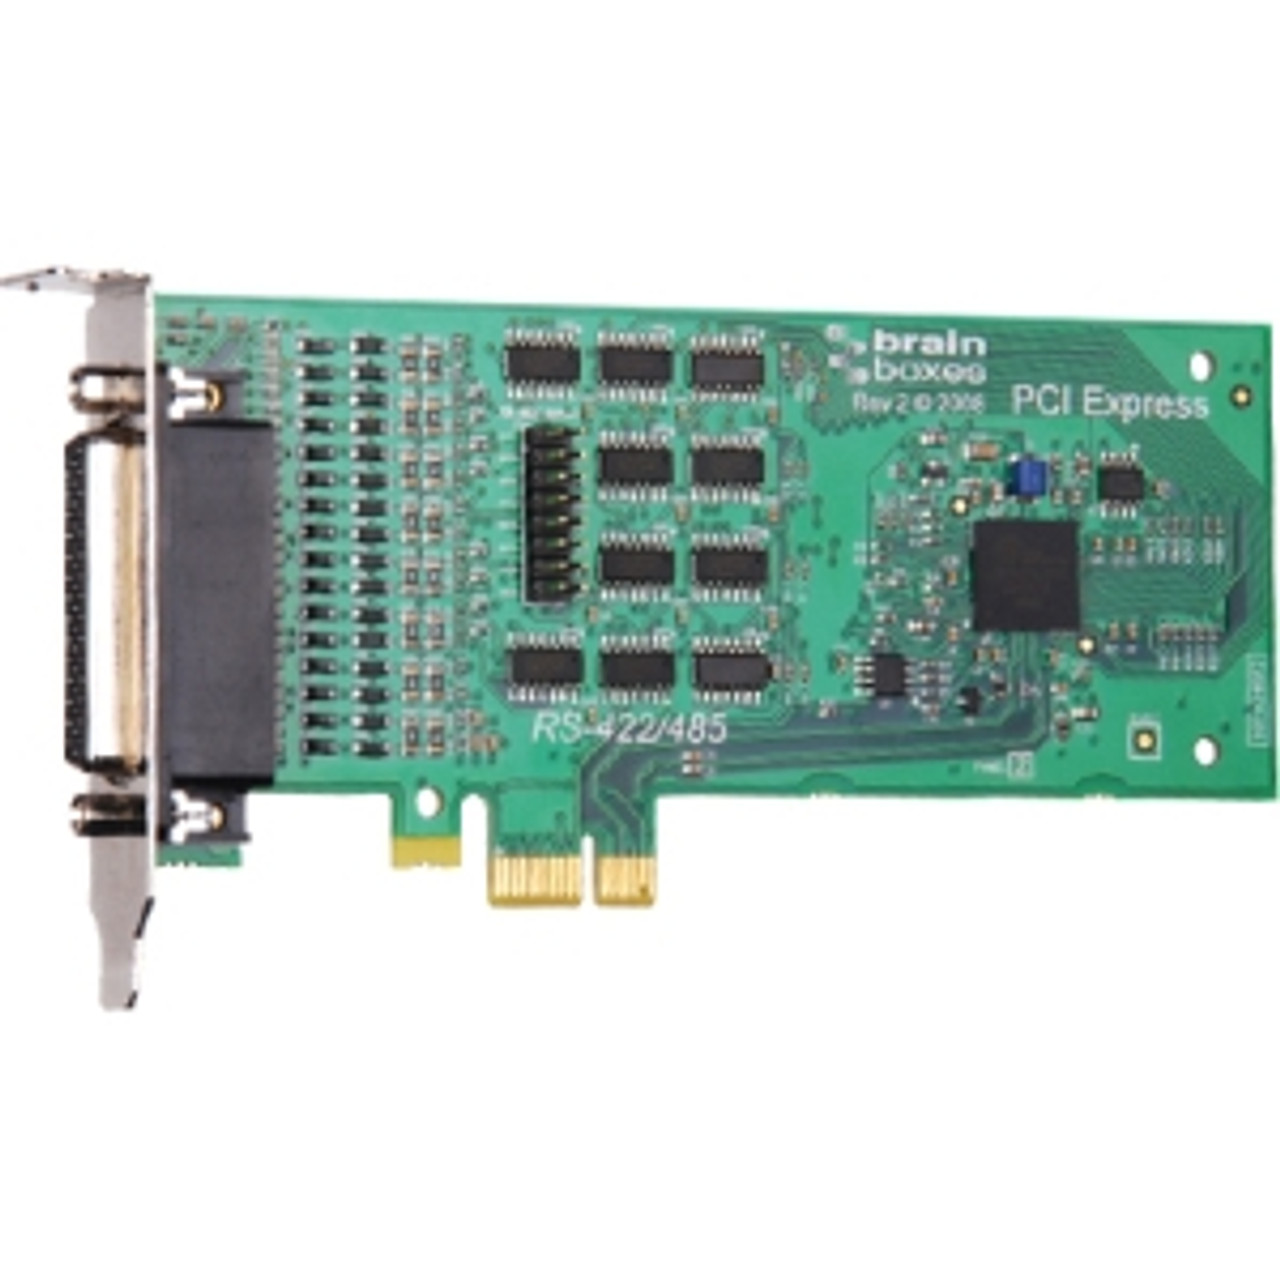 PX-335 Brainboxes 4-port Serial Adapter PCI Express x1 4 x DB-9 Male RS-422/485 Serial Via Cable Plug-in Card